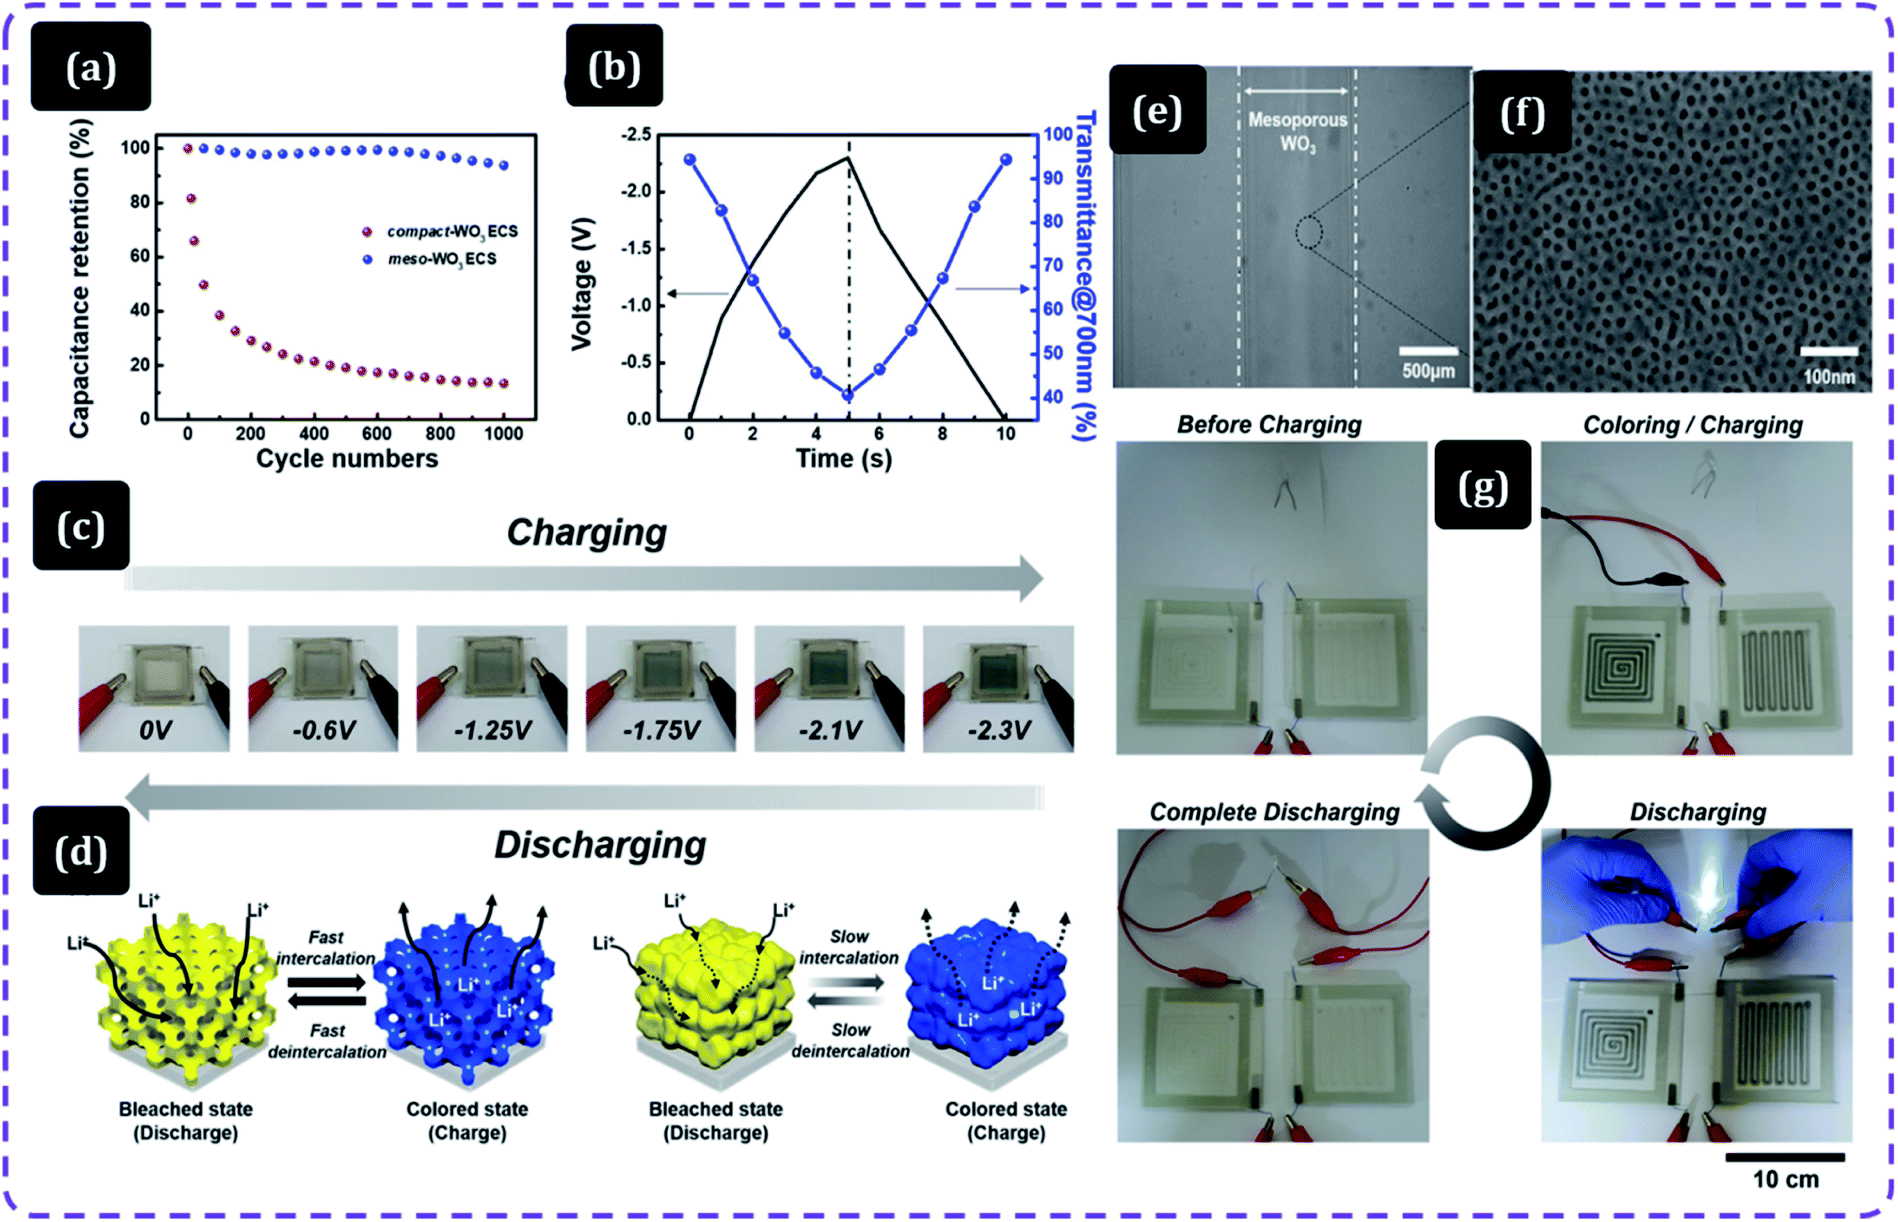 Nanostructured materials for electrochromic energy storage systems -  Journal of Materials Chemistry A (RSC Publishing) DOI:10.1039/D1TA07237D